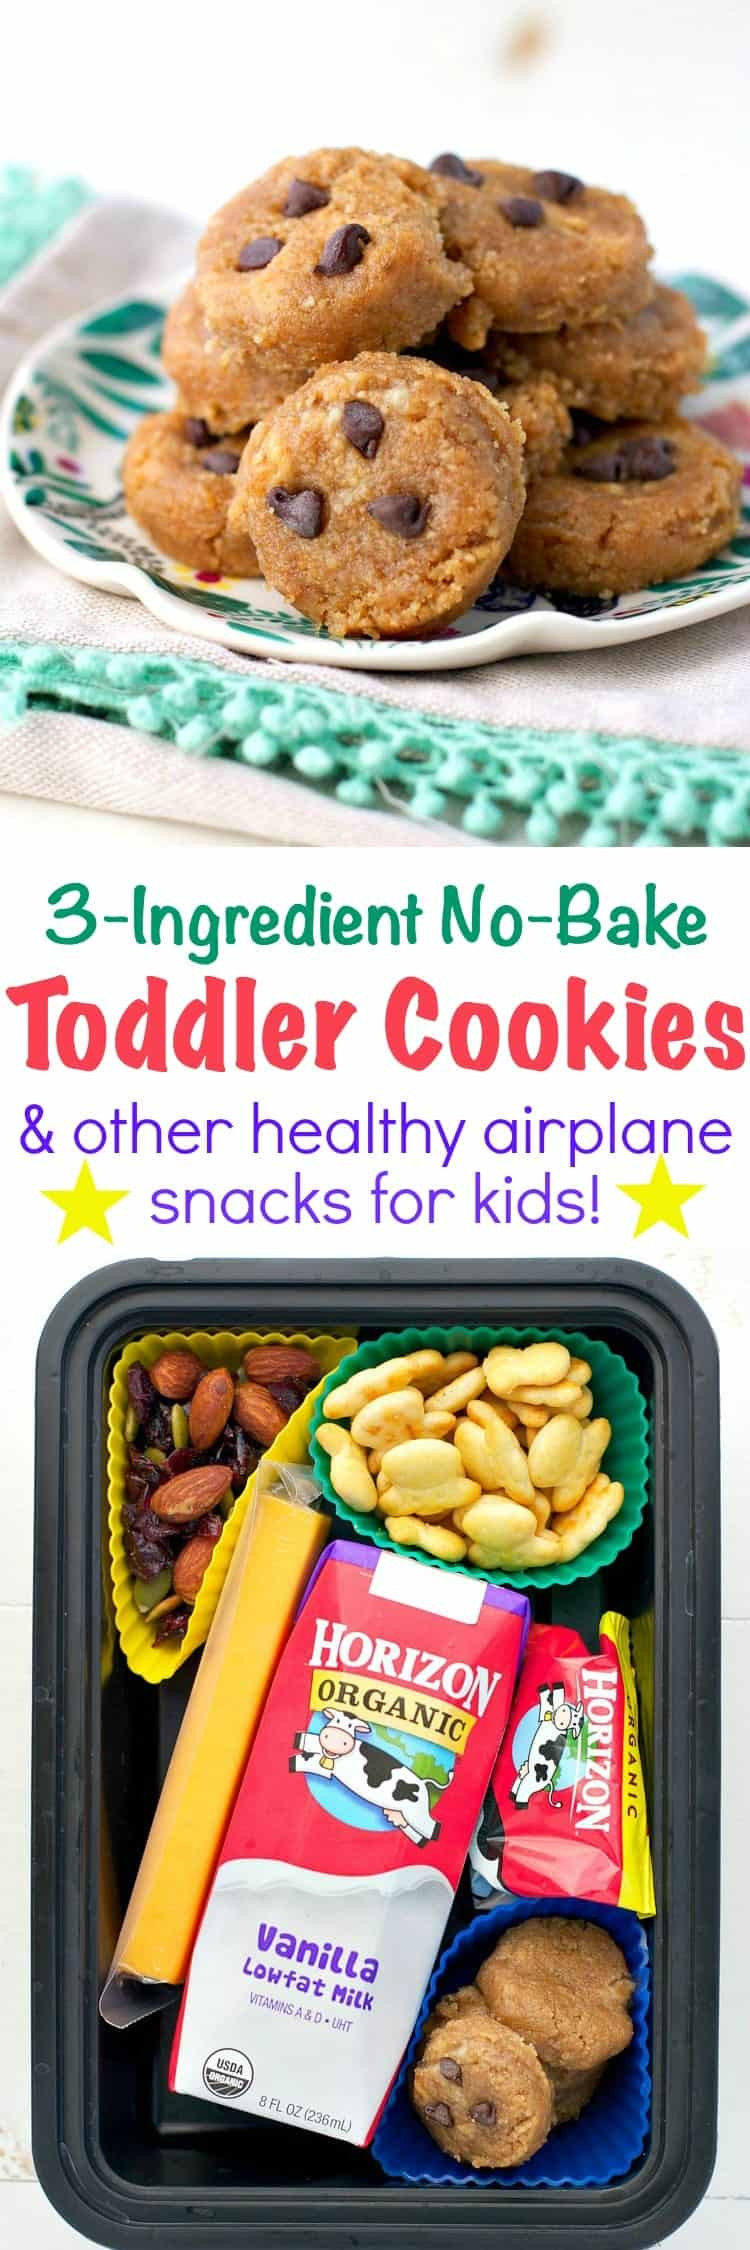 Healthy Airplane Snacks
 3 Ingre nt No Bake Toddler Cookies Airplane Snacks for